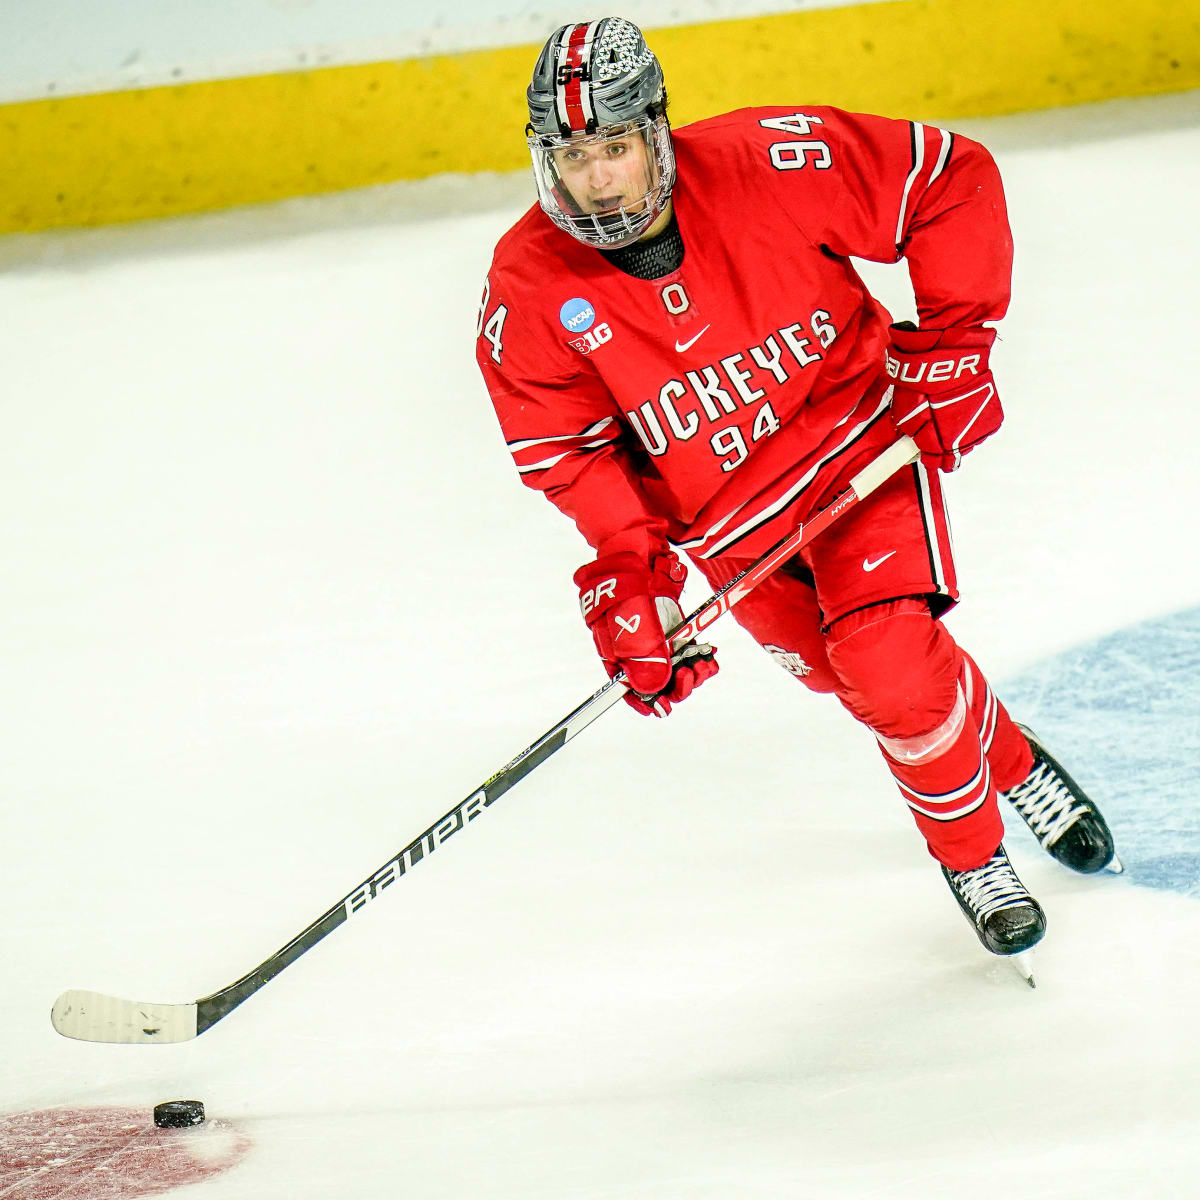 Quinnipiac vs Ohio State Free Live Stream College Hockey Online - How to Watch and Stream Major League and College Sports